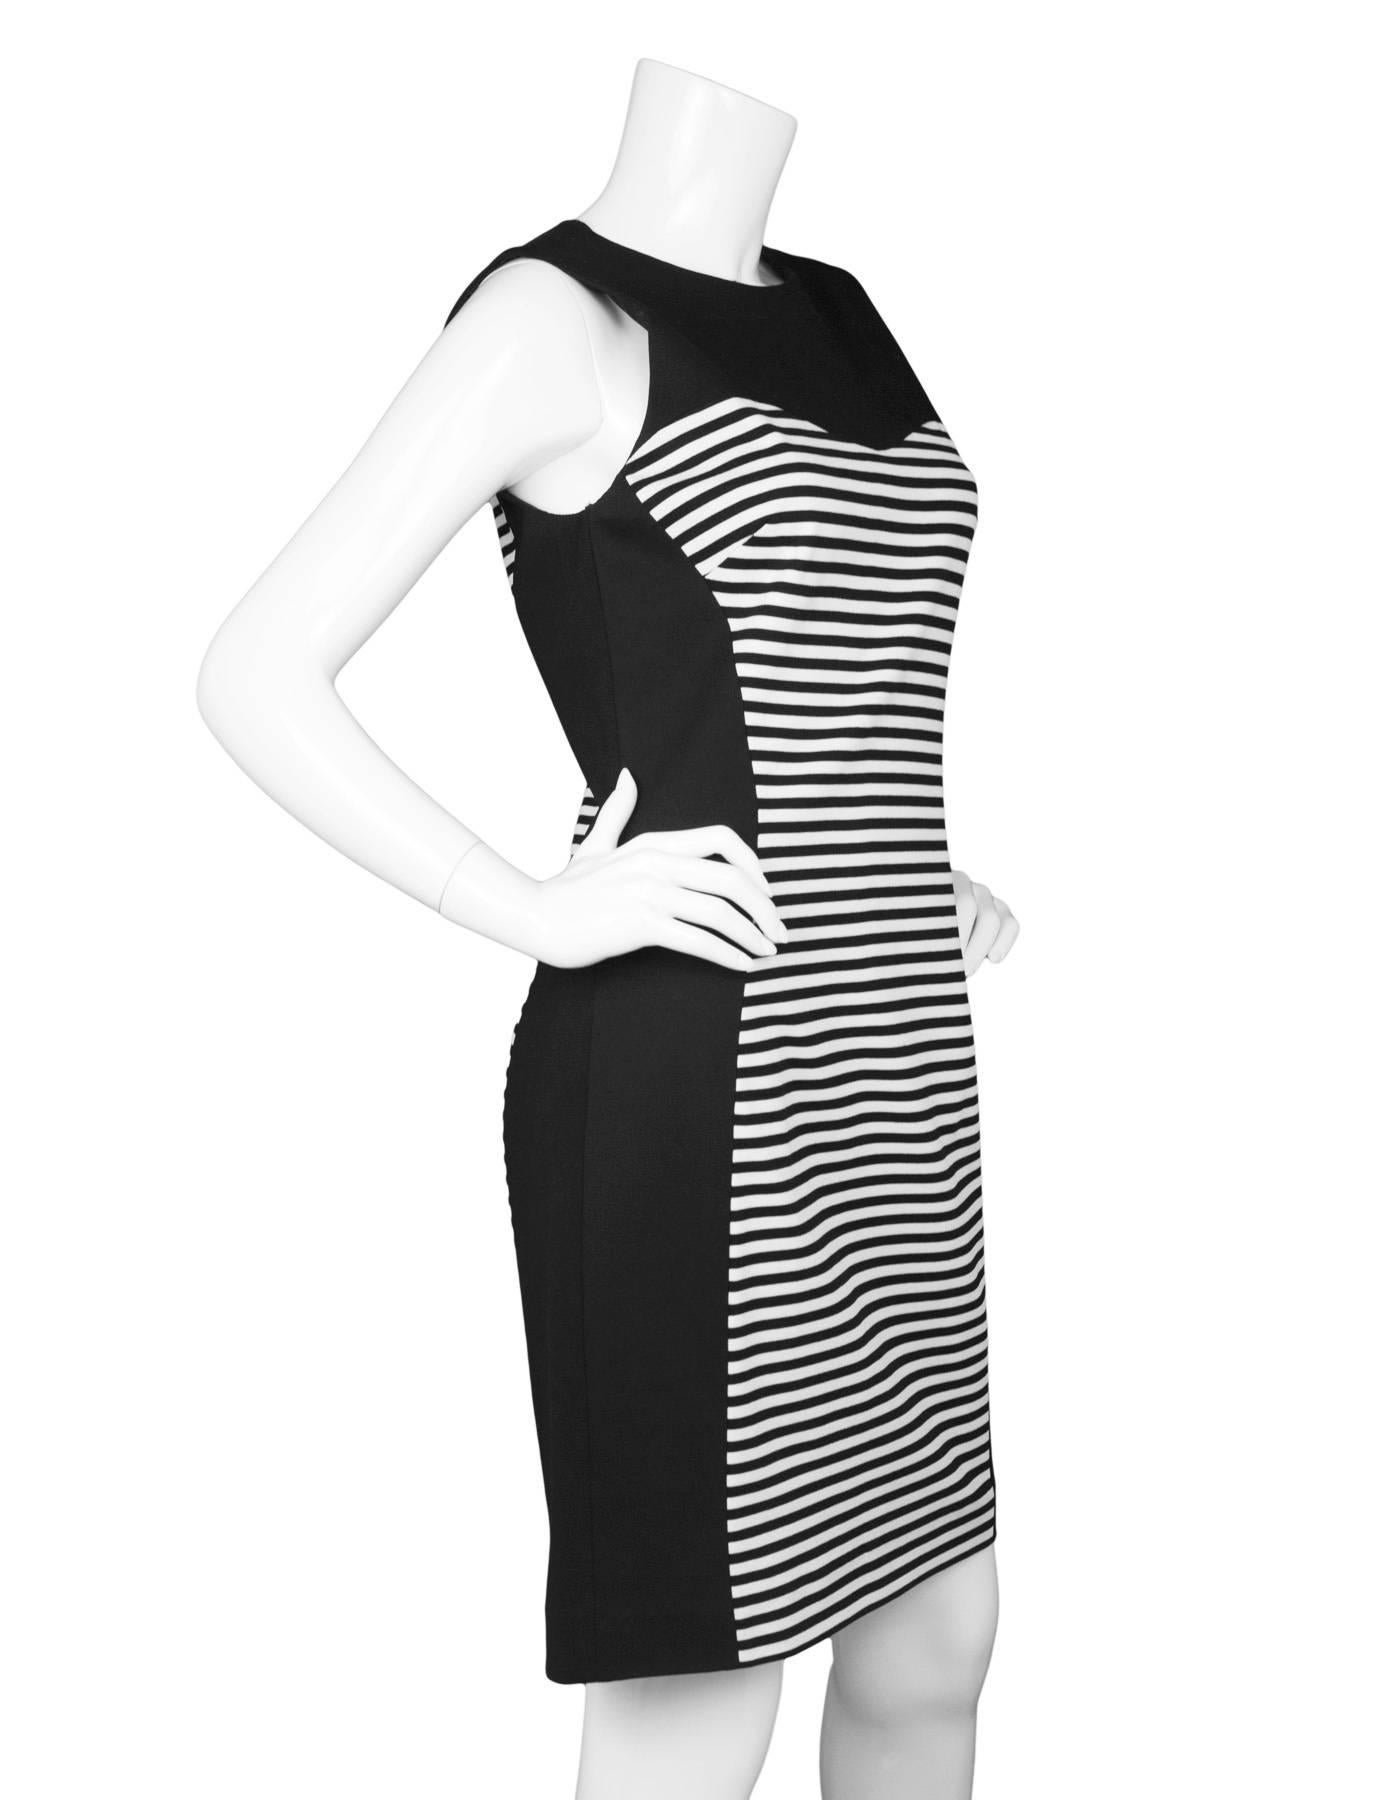 Michael Kors Black & White Stripe Sheath Dress 

Made In: Italy
Color: Black and white
Composition: Not given- believed to be a poly-blend
Lining: Black, poly-blend
Closure/Opening: Back zip up
Exterior Pockets: None
Interior Pockets: